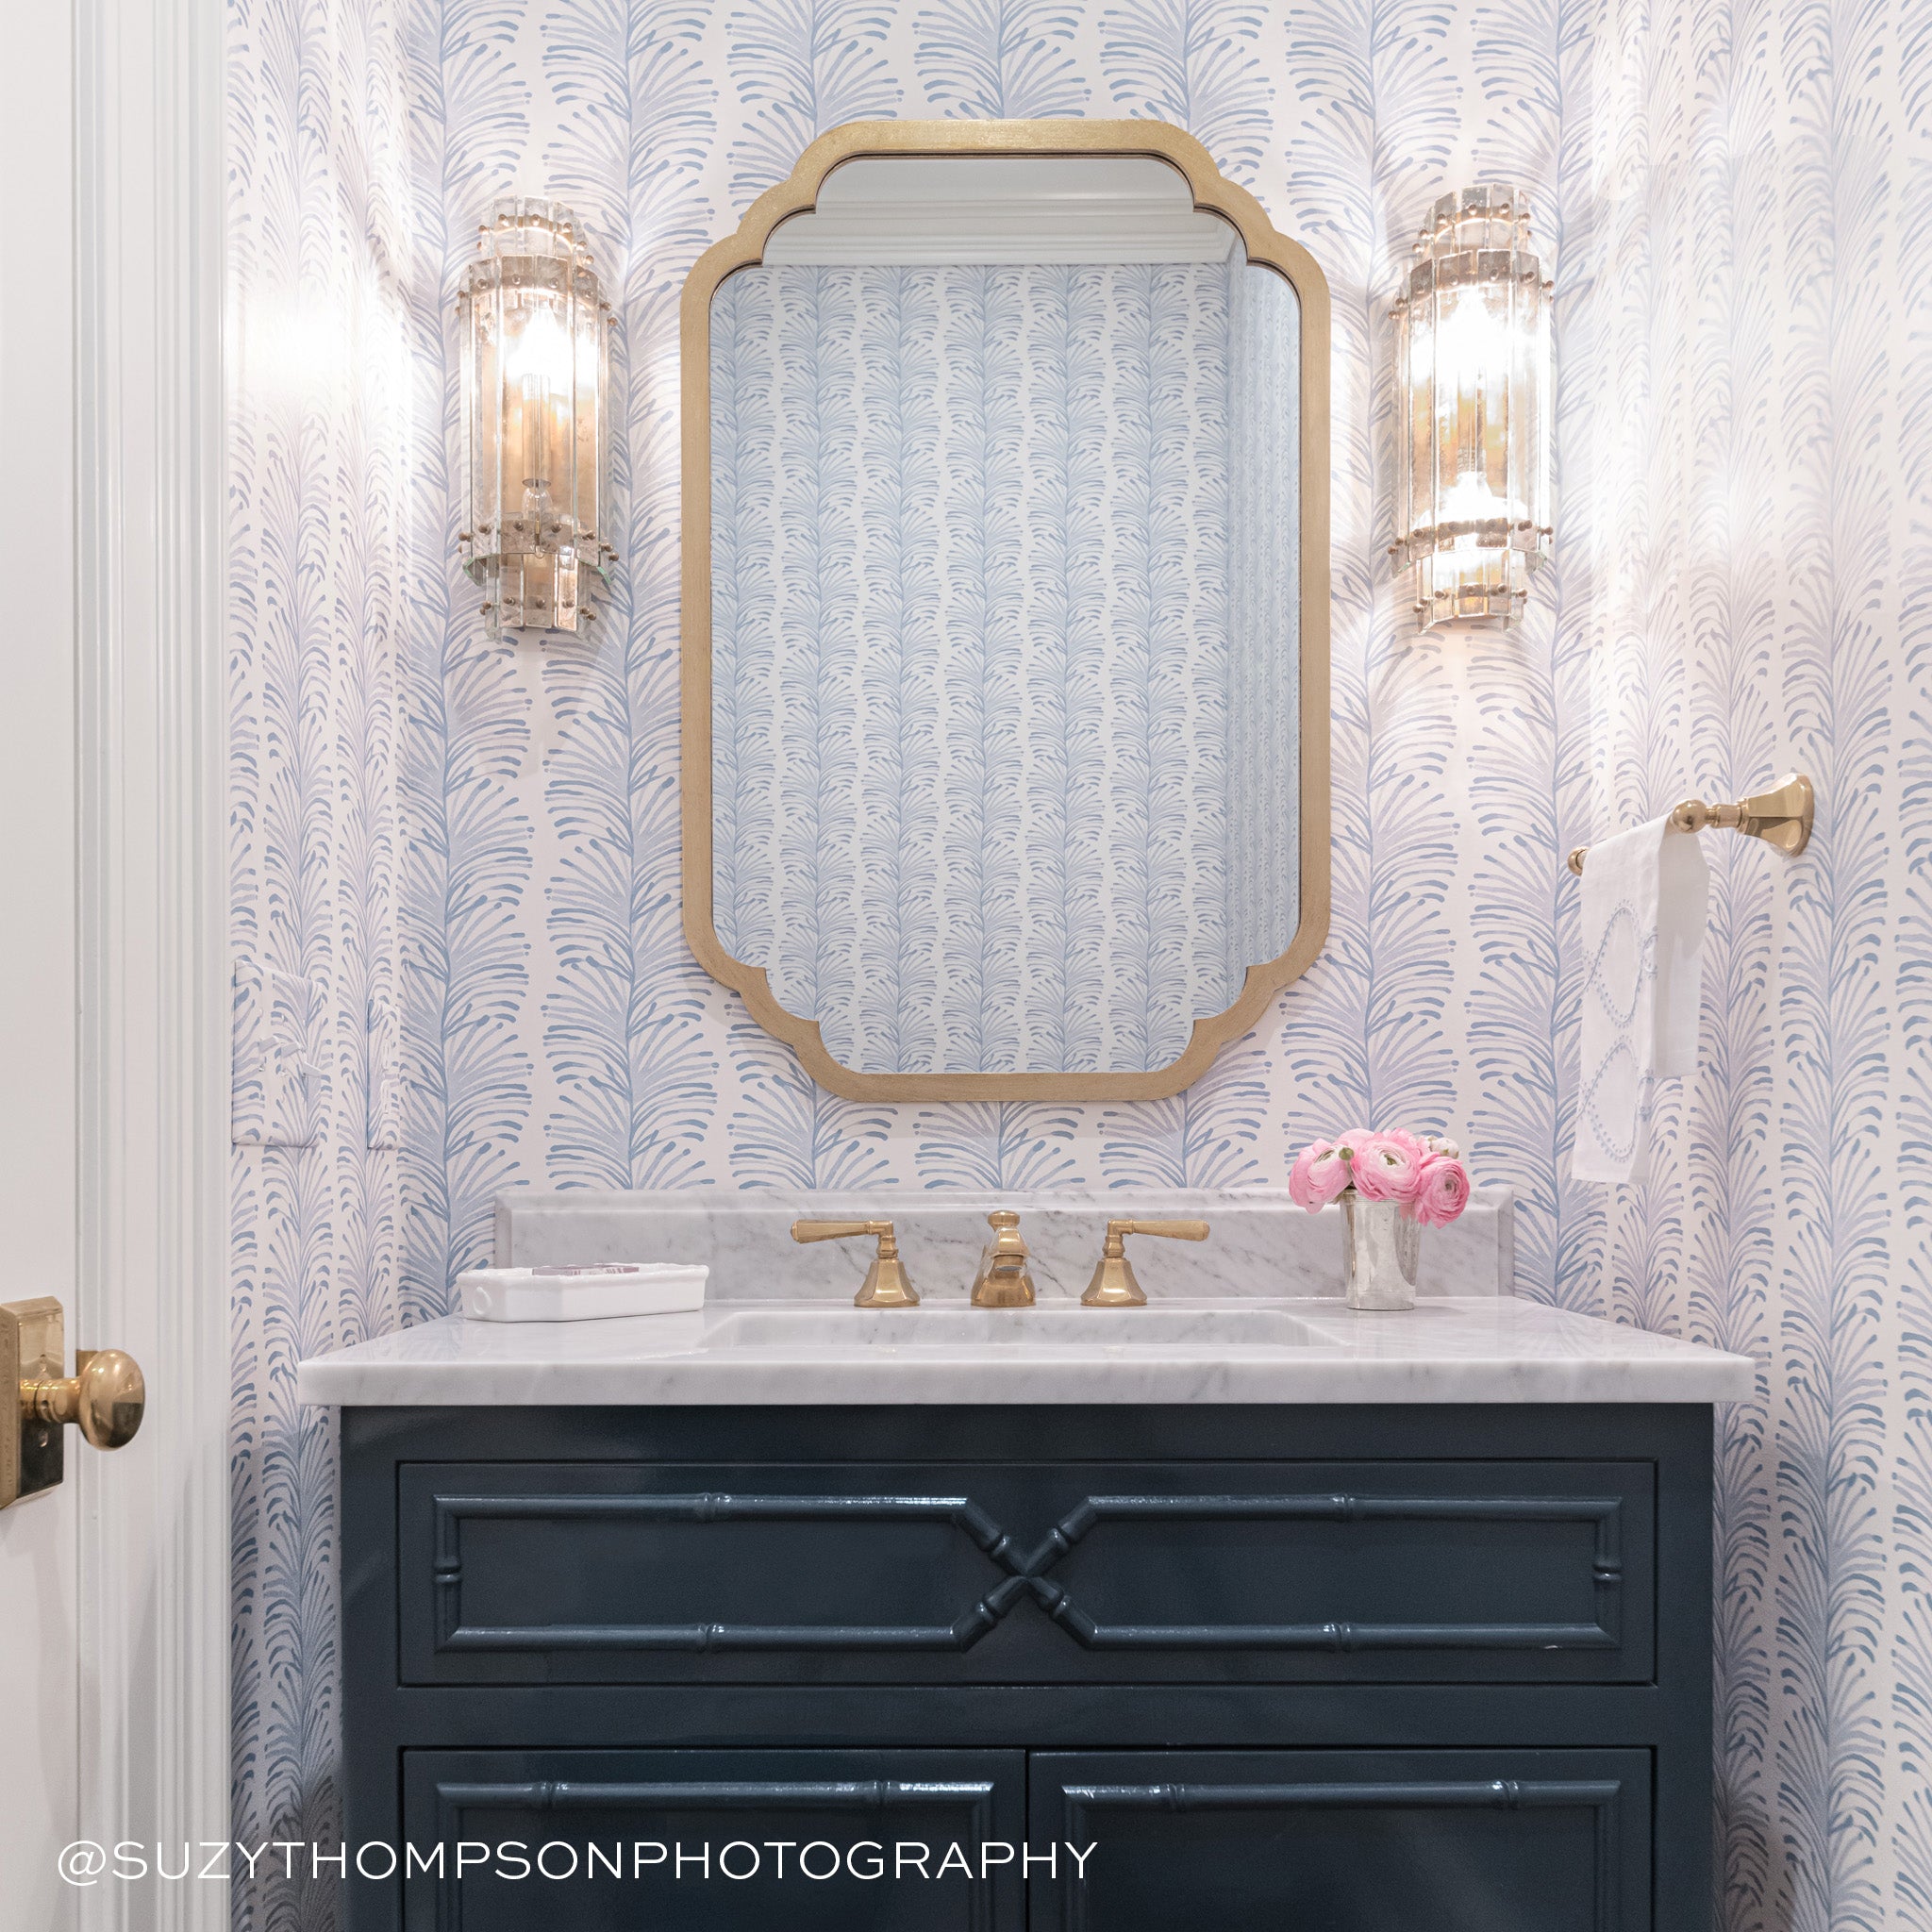 White marble bathroom sink styled with Sky Blue Botanical Stripe Printed Wallpaper with gold mirror hung in the center and two lamps by the side. Photo taken by Suzy Thompson